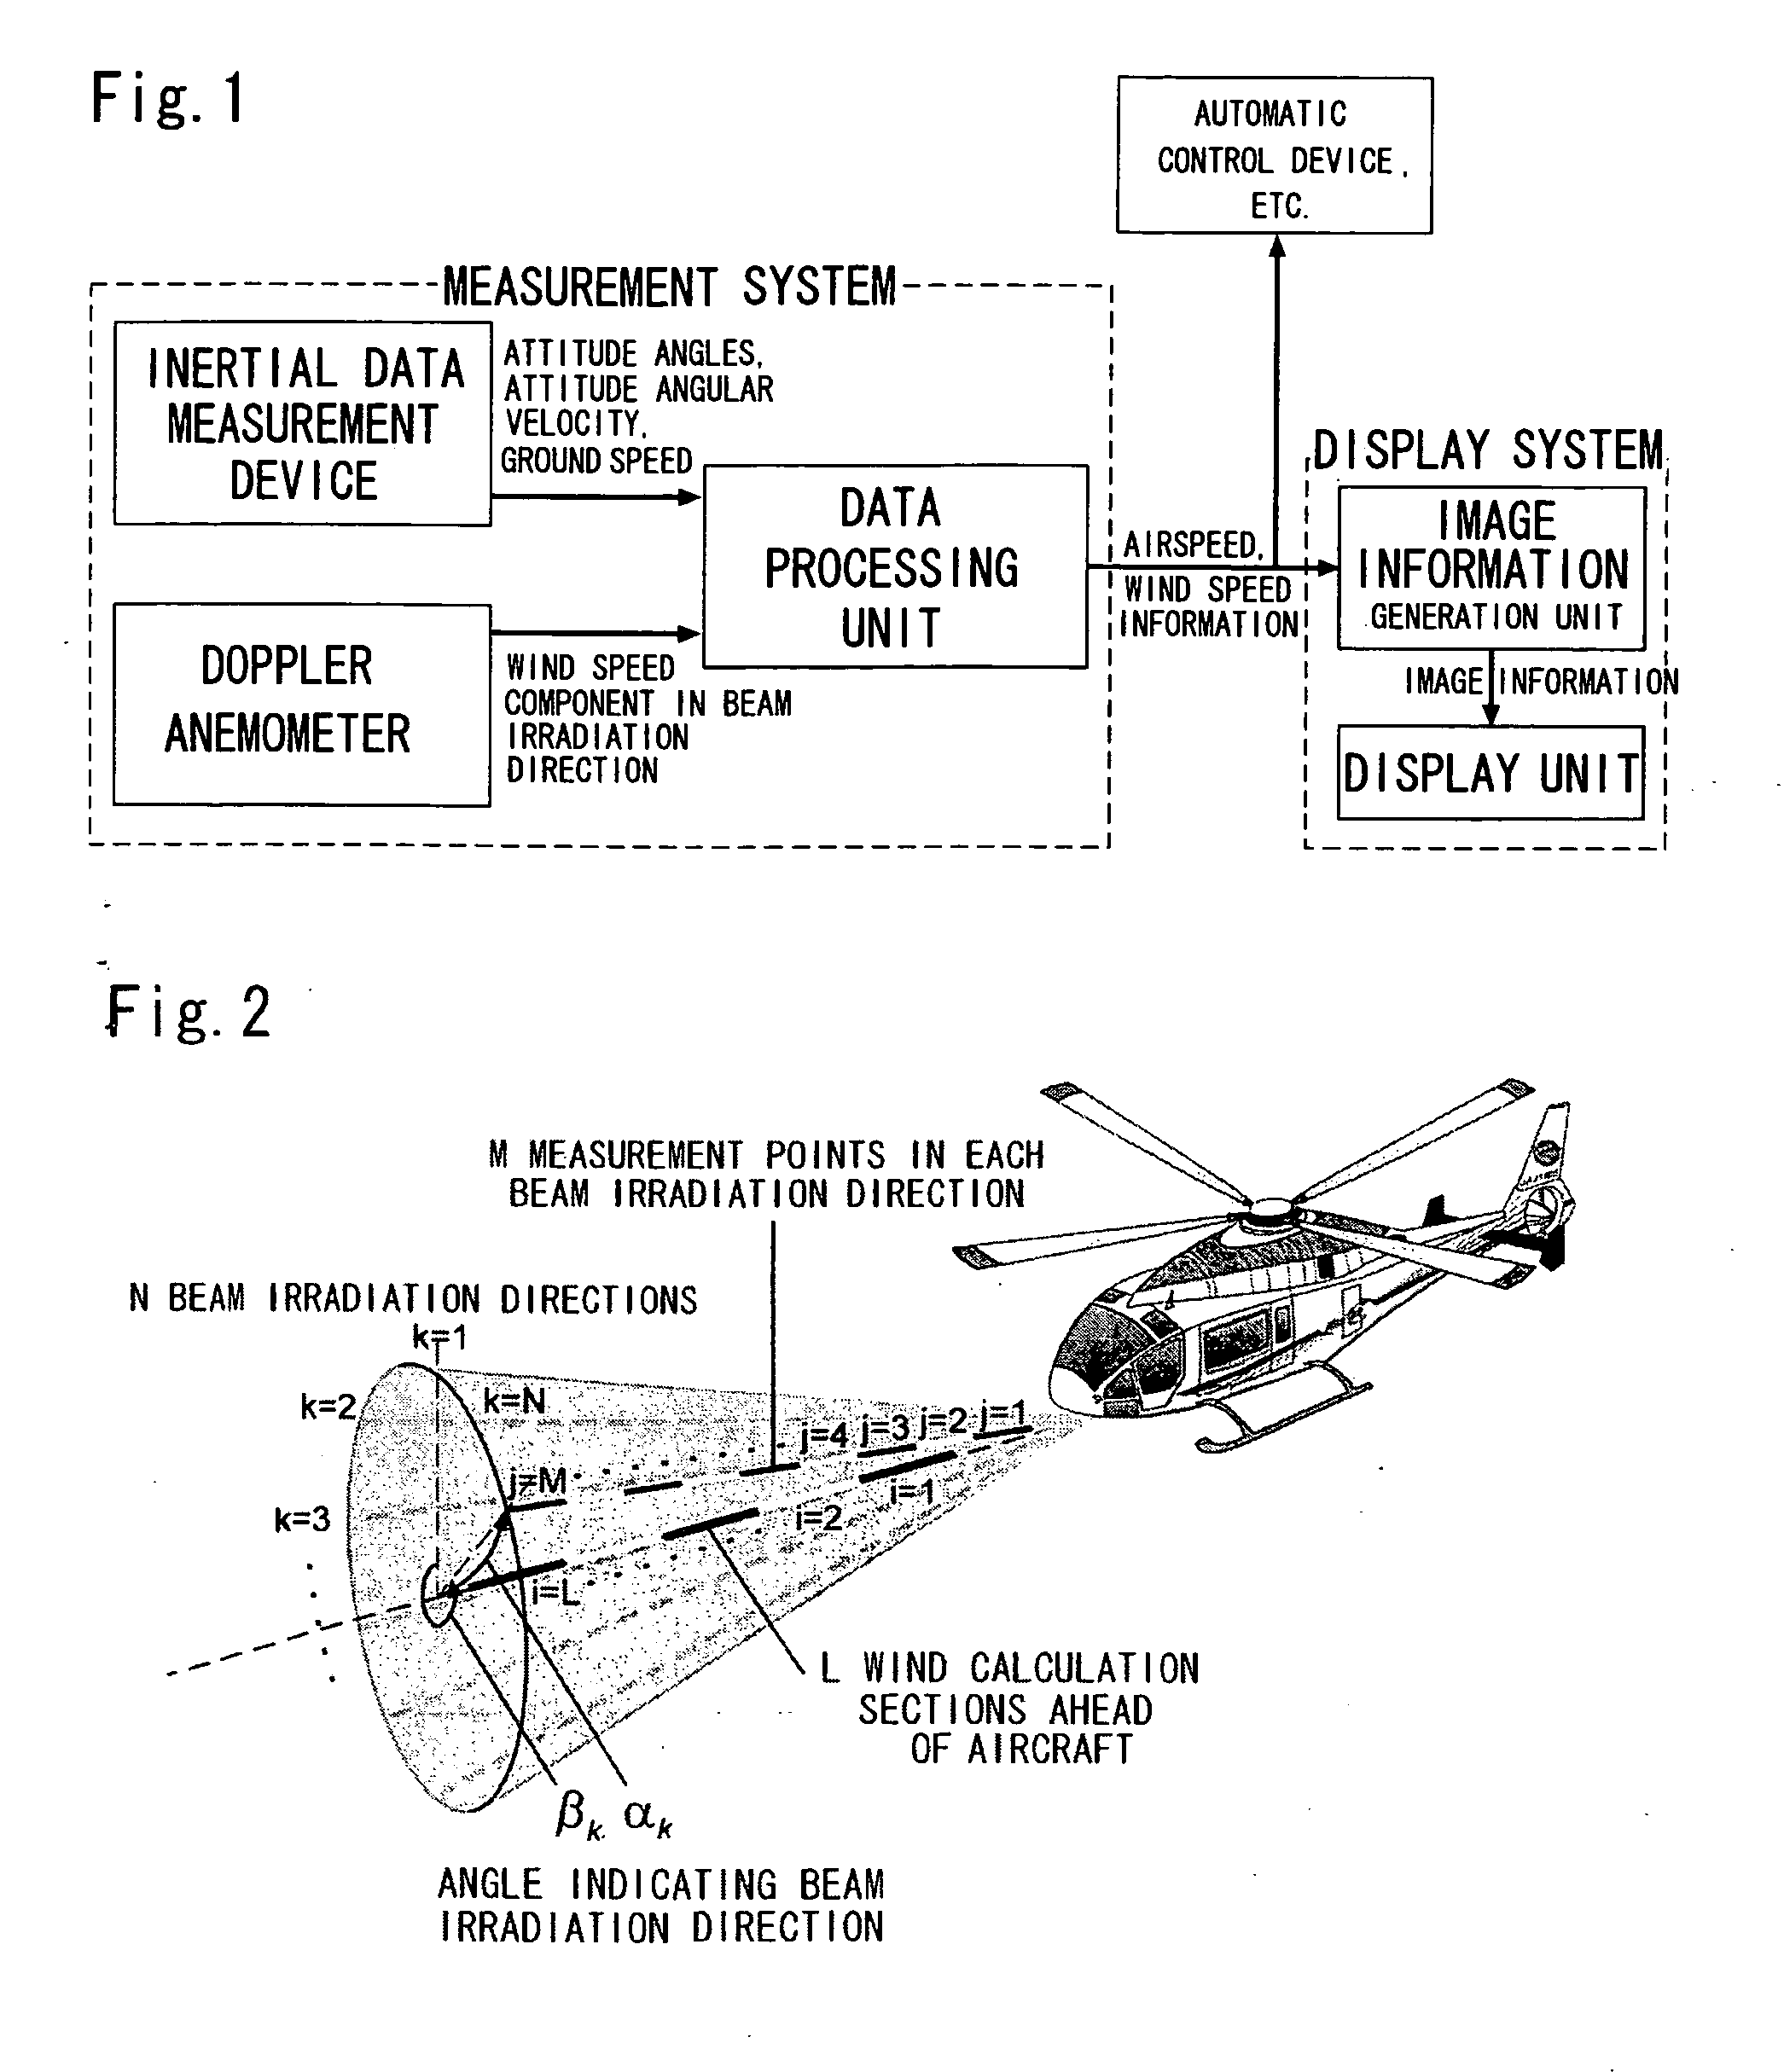 Airspeed / wind speed measurement device for aircraft, and display device for same